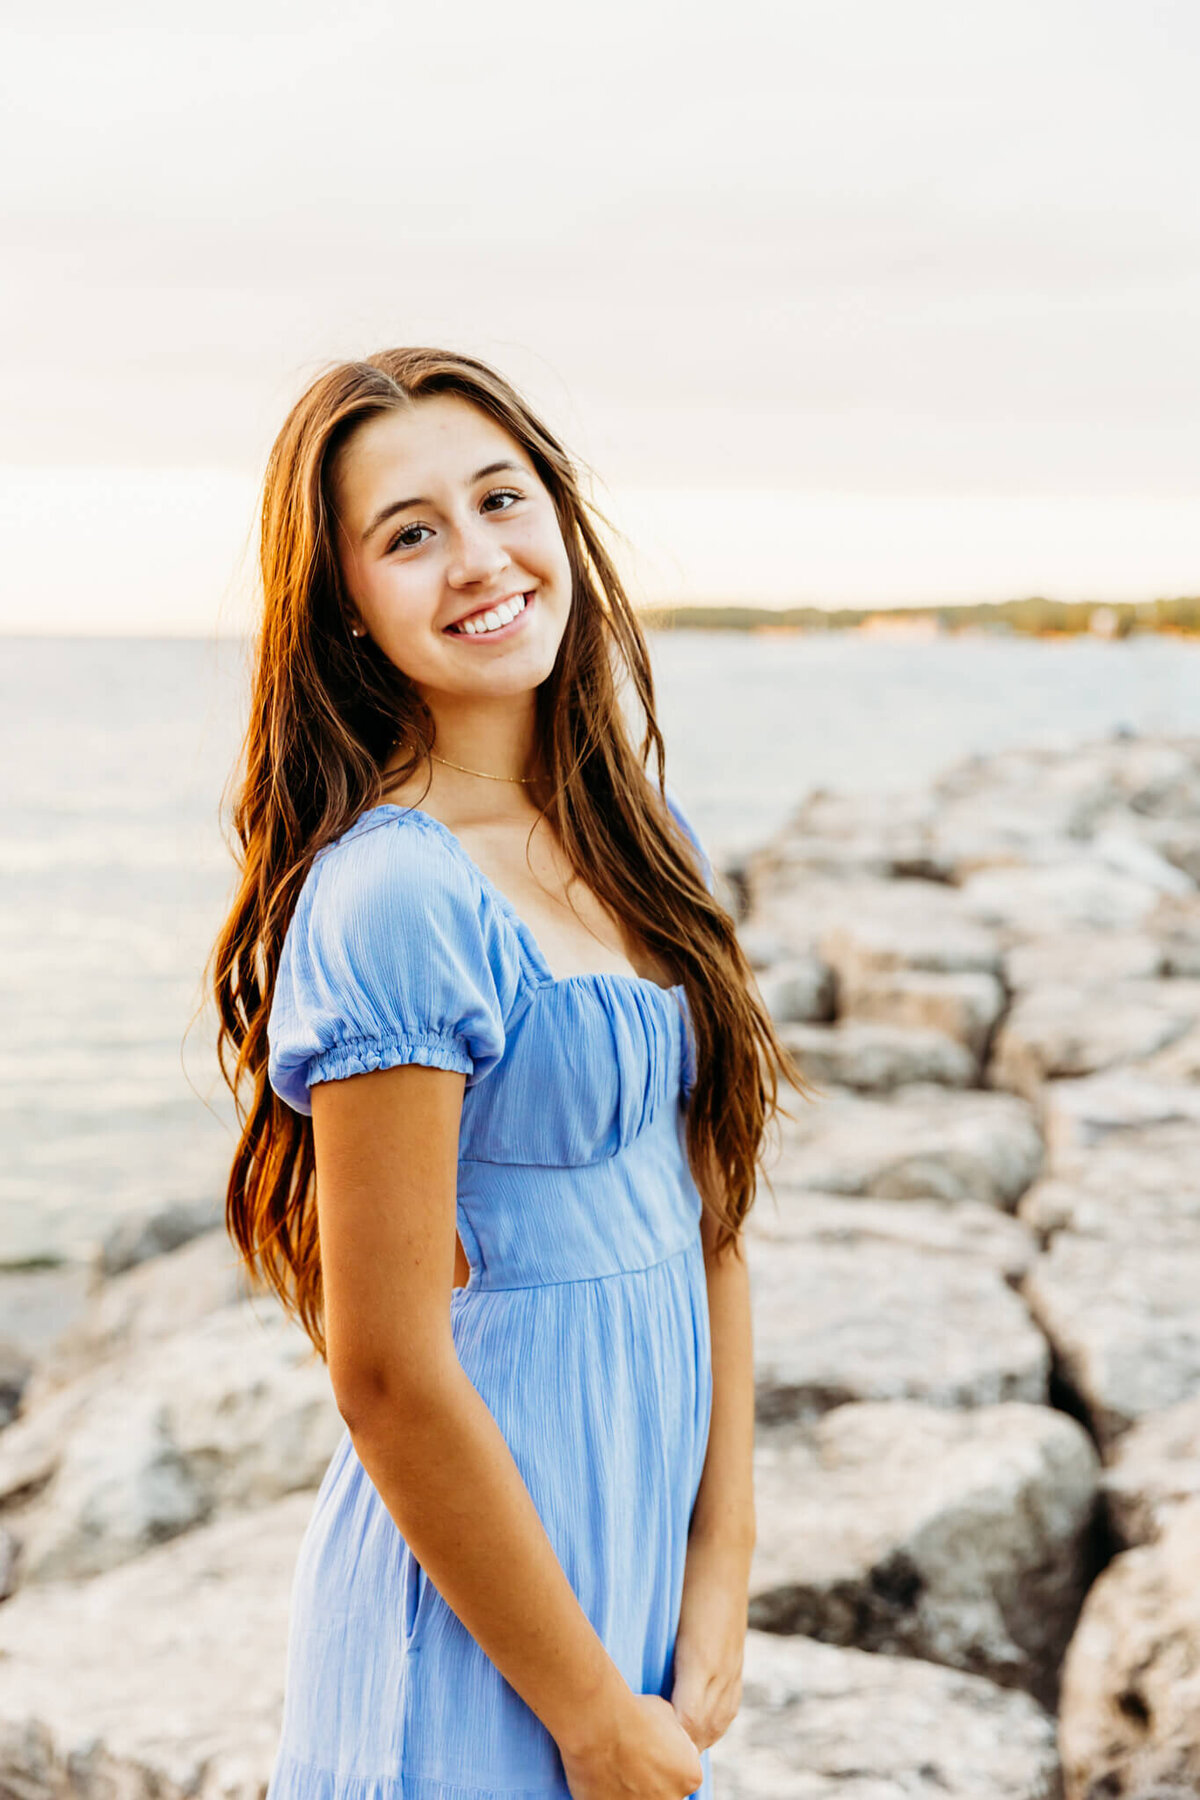 brunette high school girl in a light blue dress smiling as she poses on the rocks by the lake